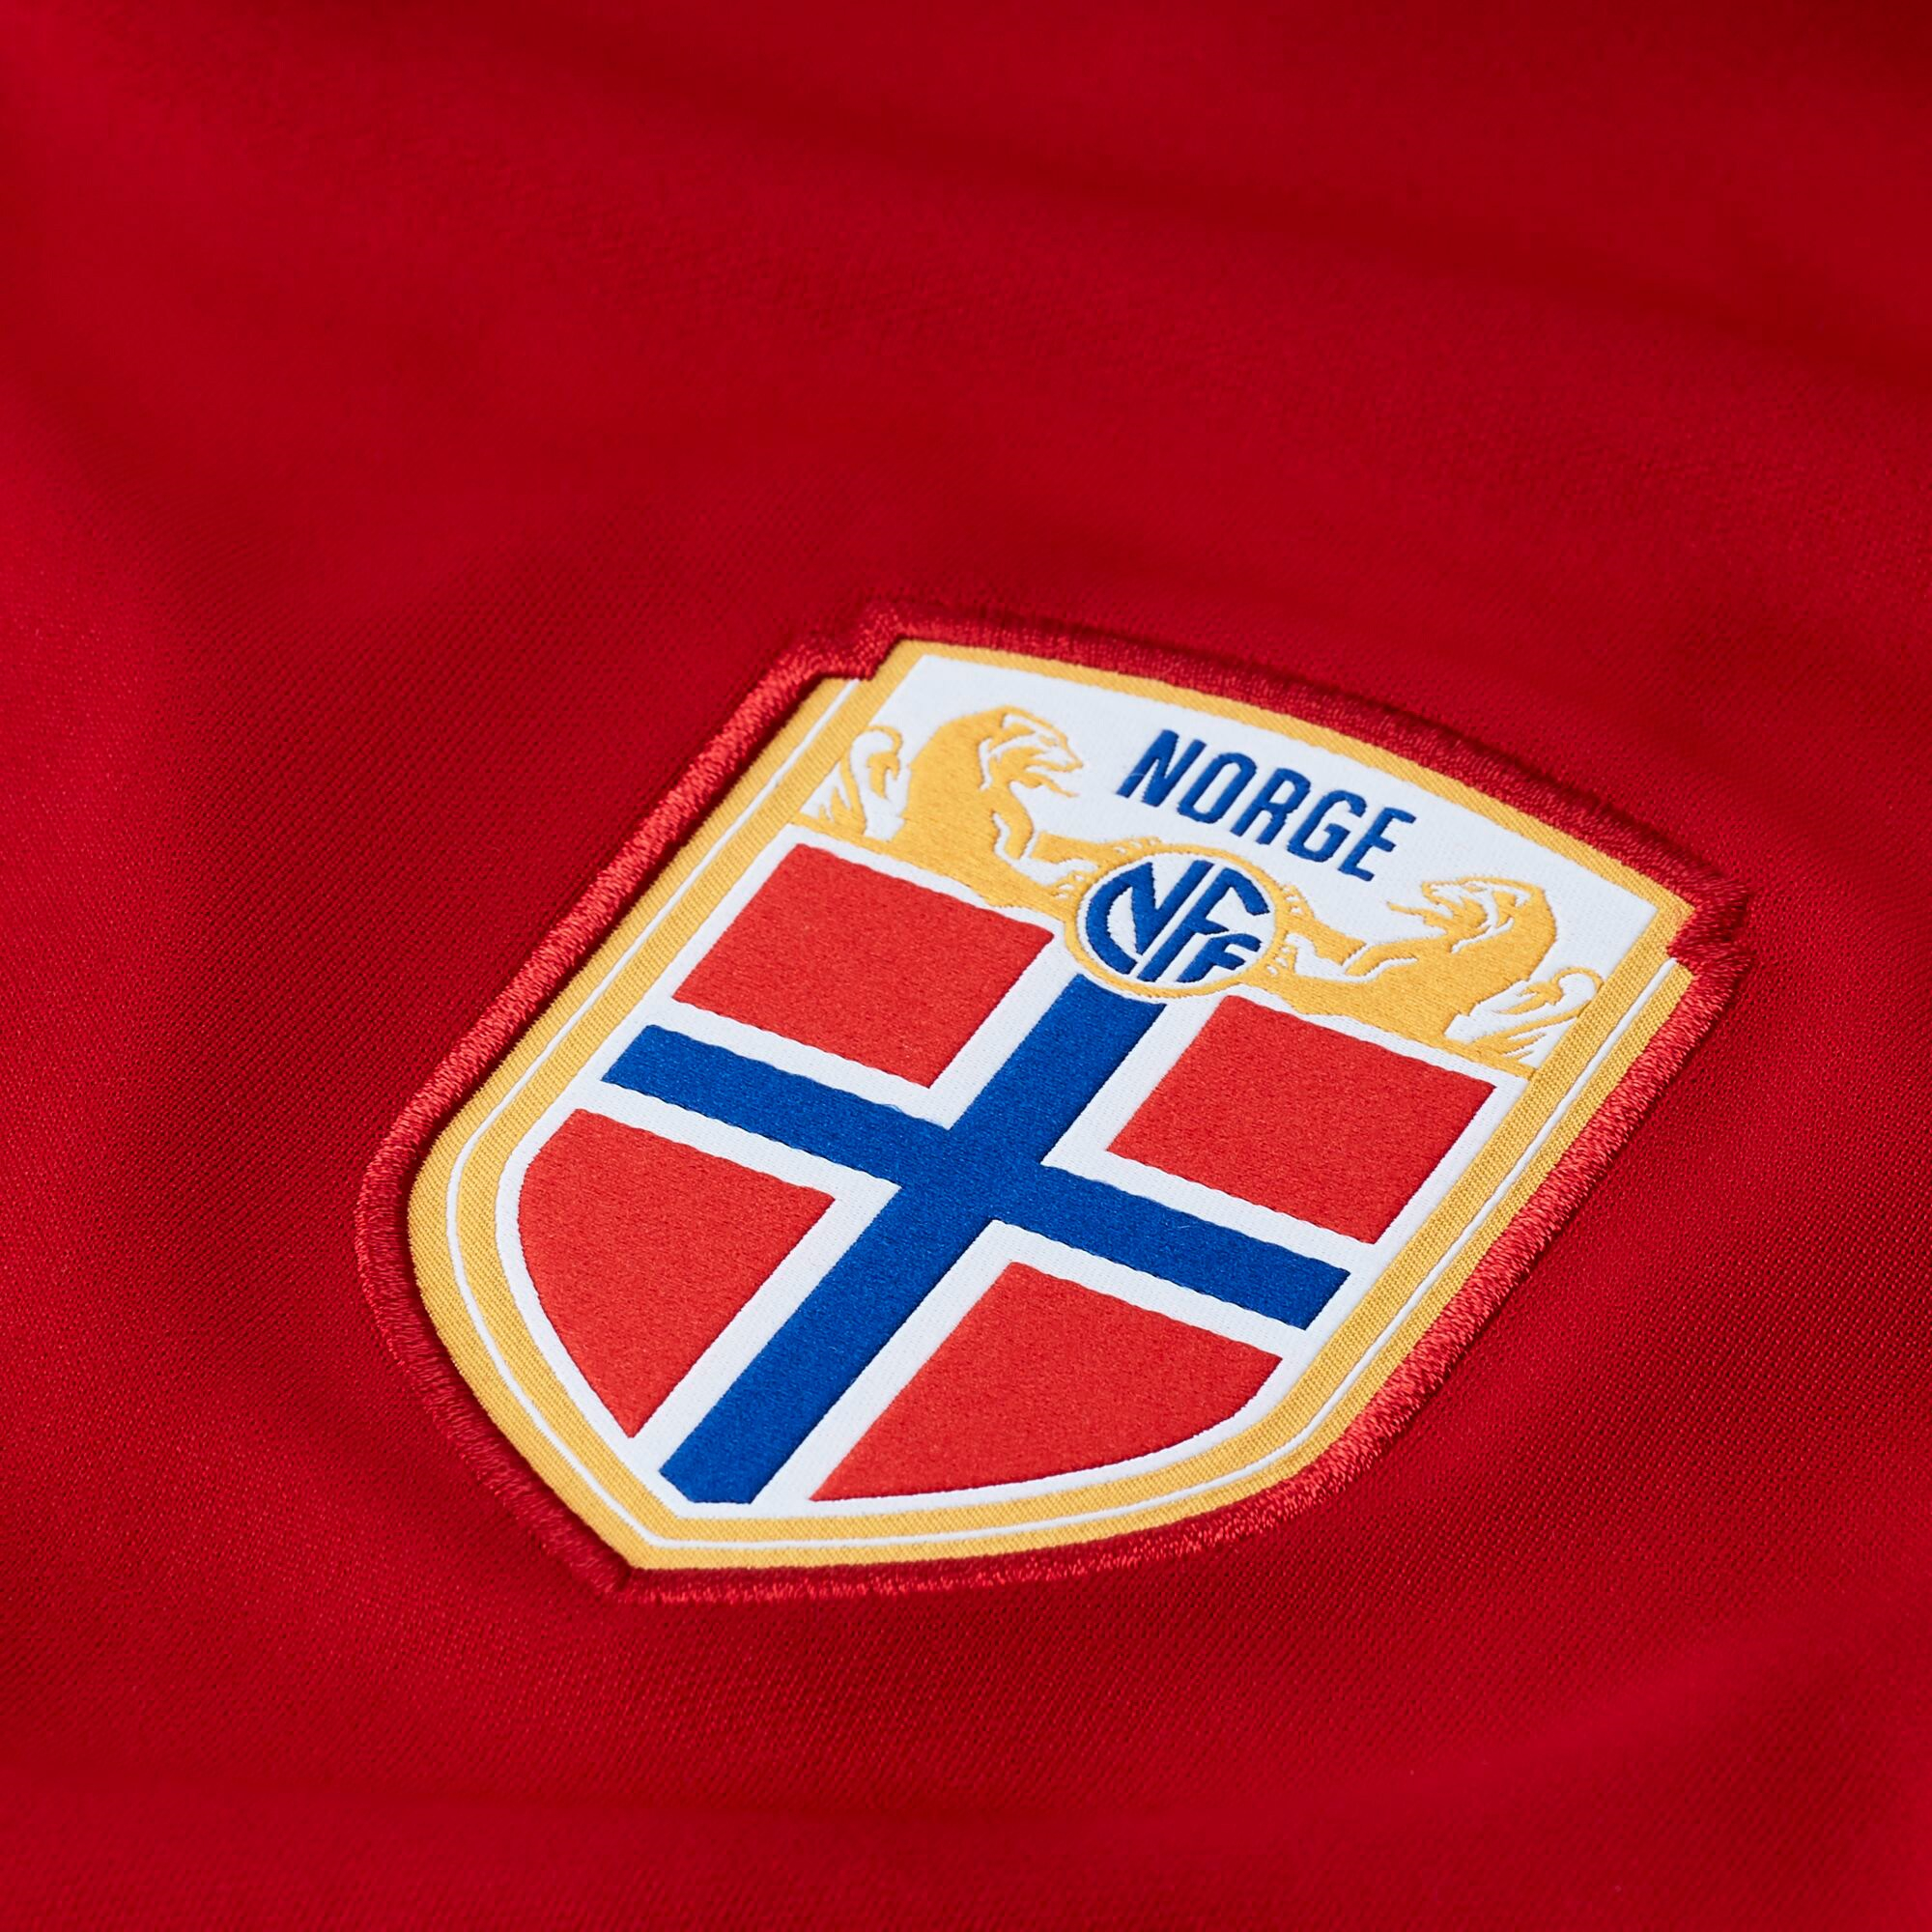 2021 Norway Soccer Jersey Home Replica Mens